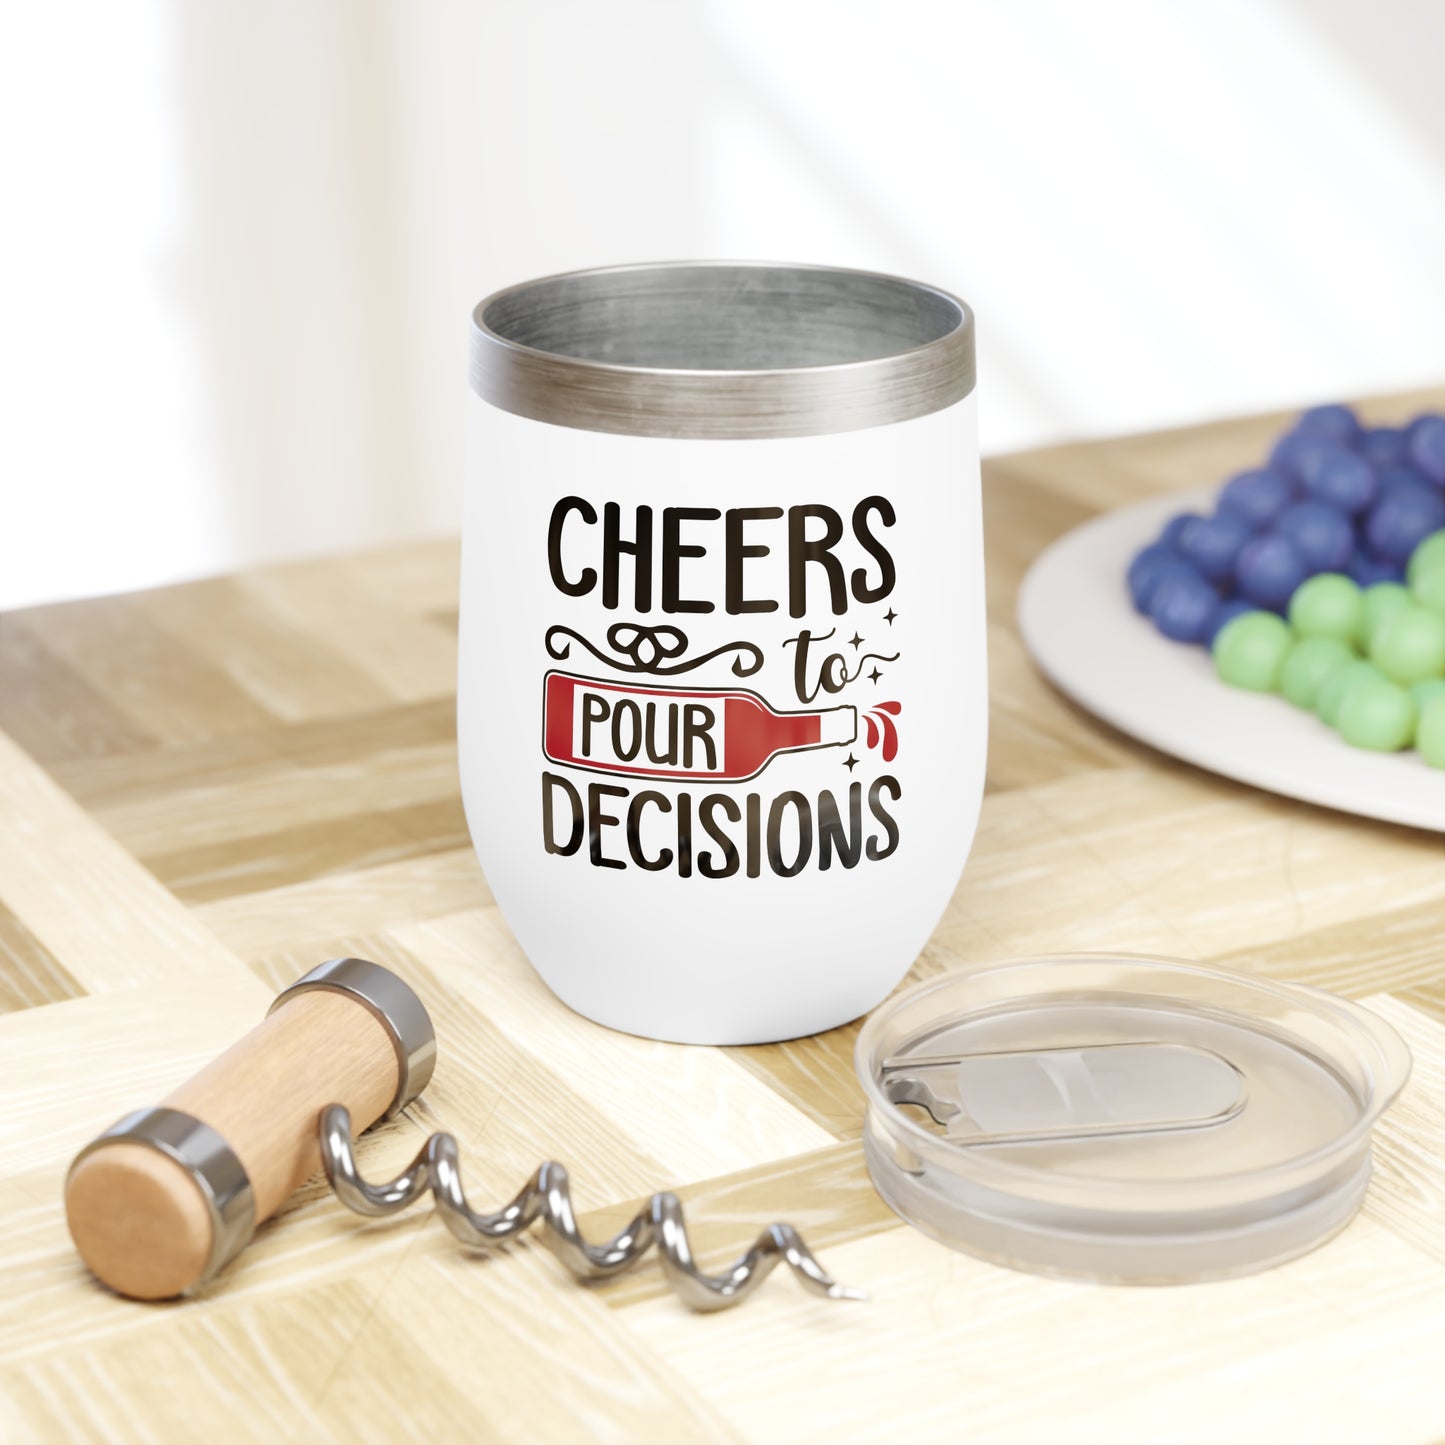 Cheers to Pour Decisions - Chill Wine Tumbler